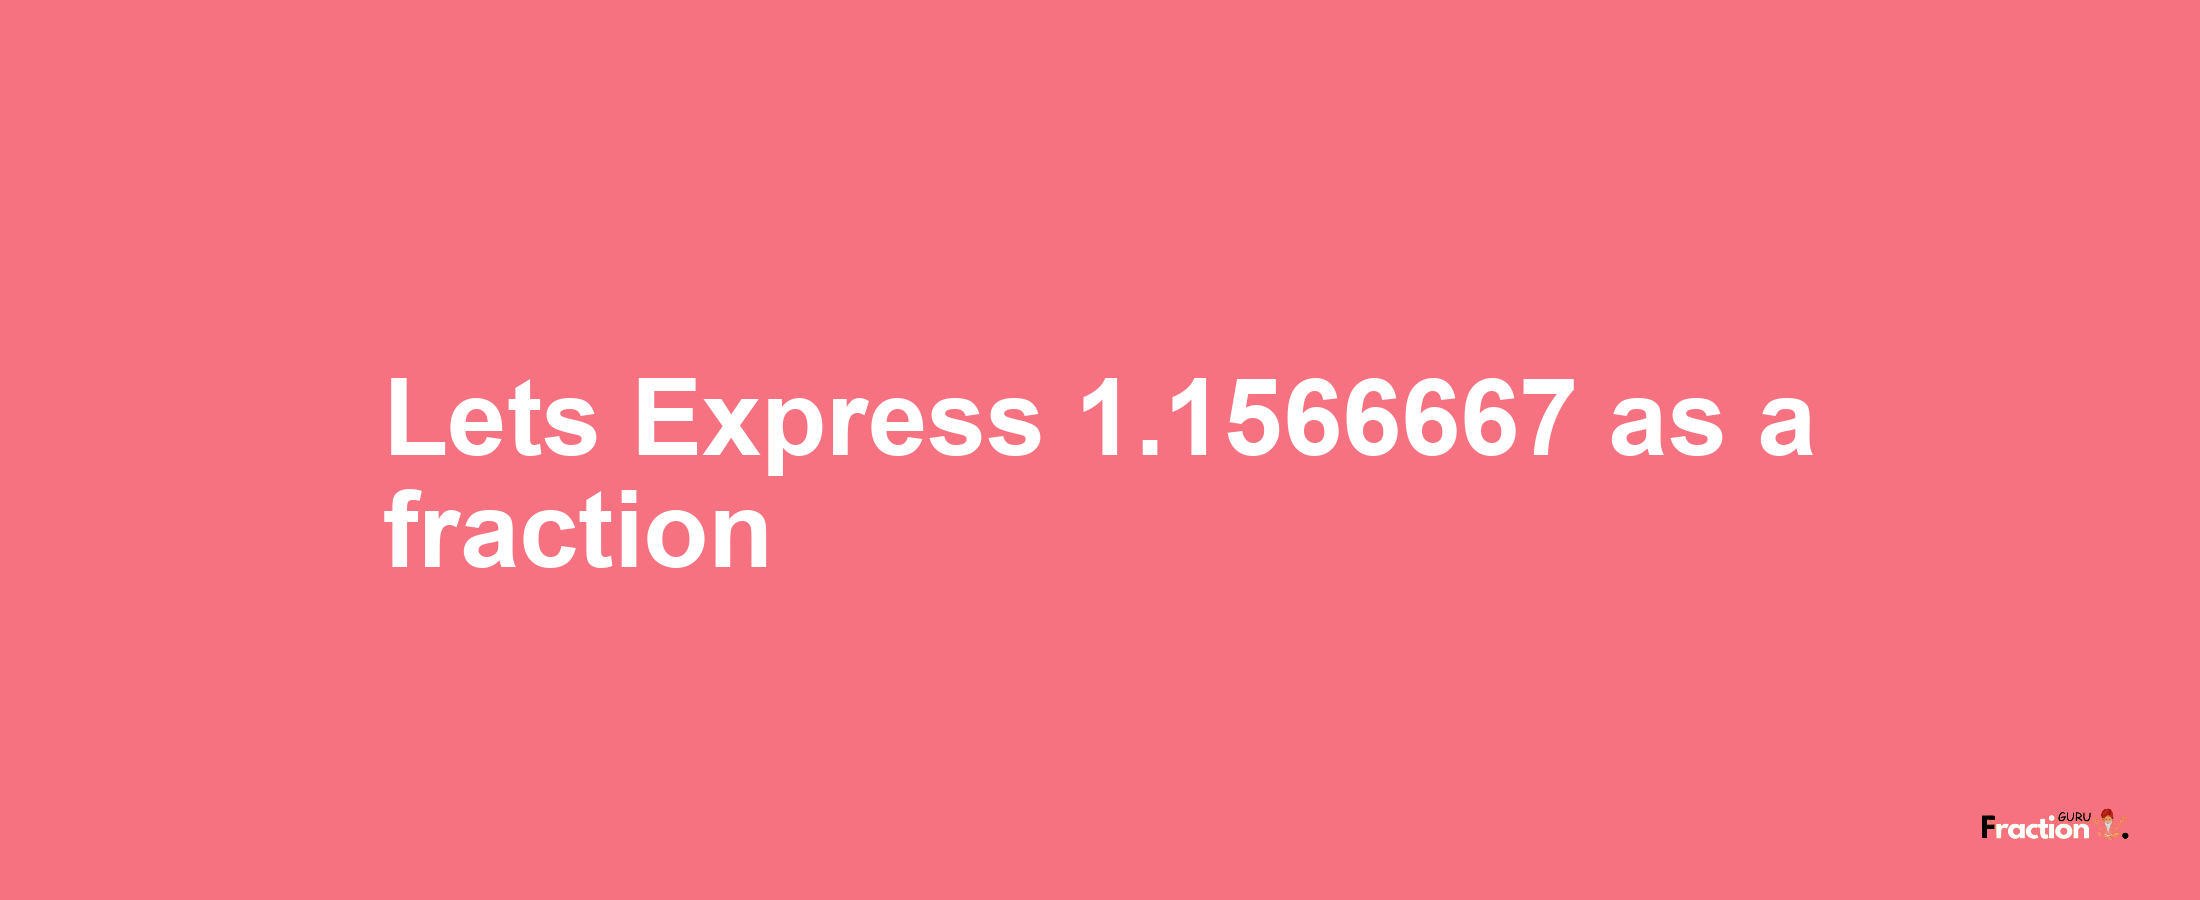 Lets Express 1.1566667 as afraction